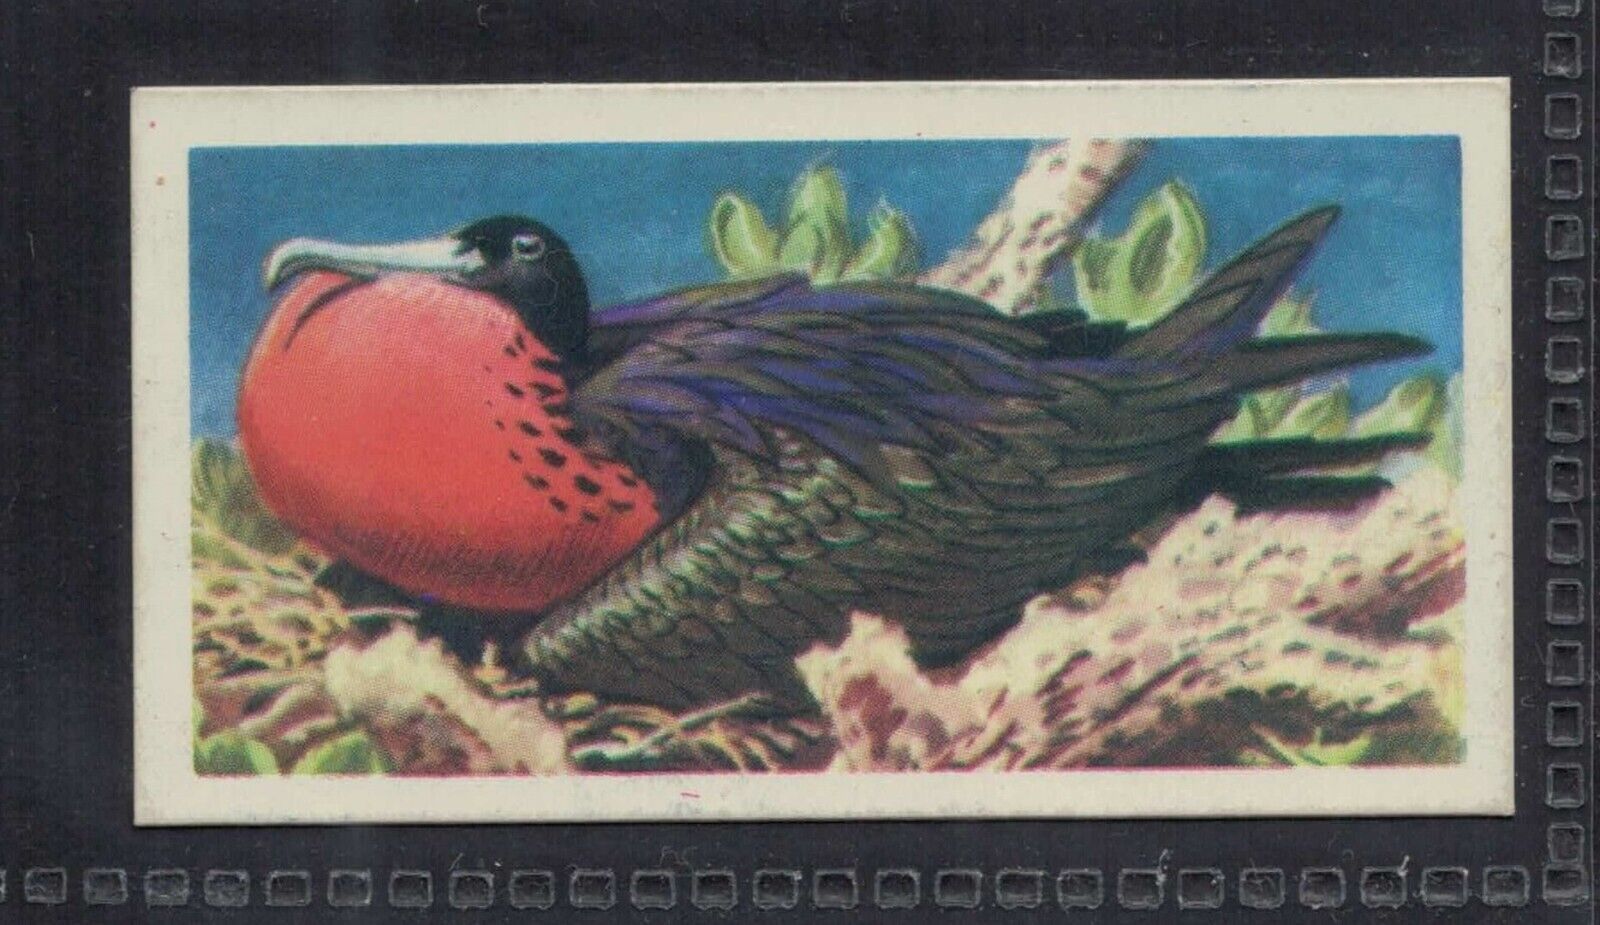 MAGNIFICENT FRIGATE BIRD - 60 + year old English Trade Card # 34